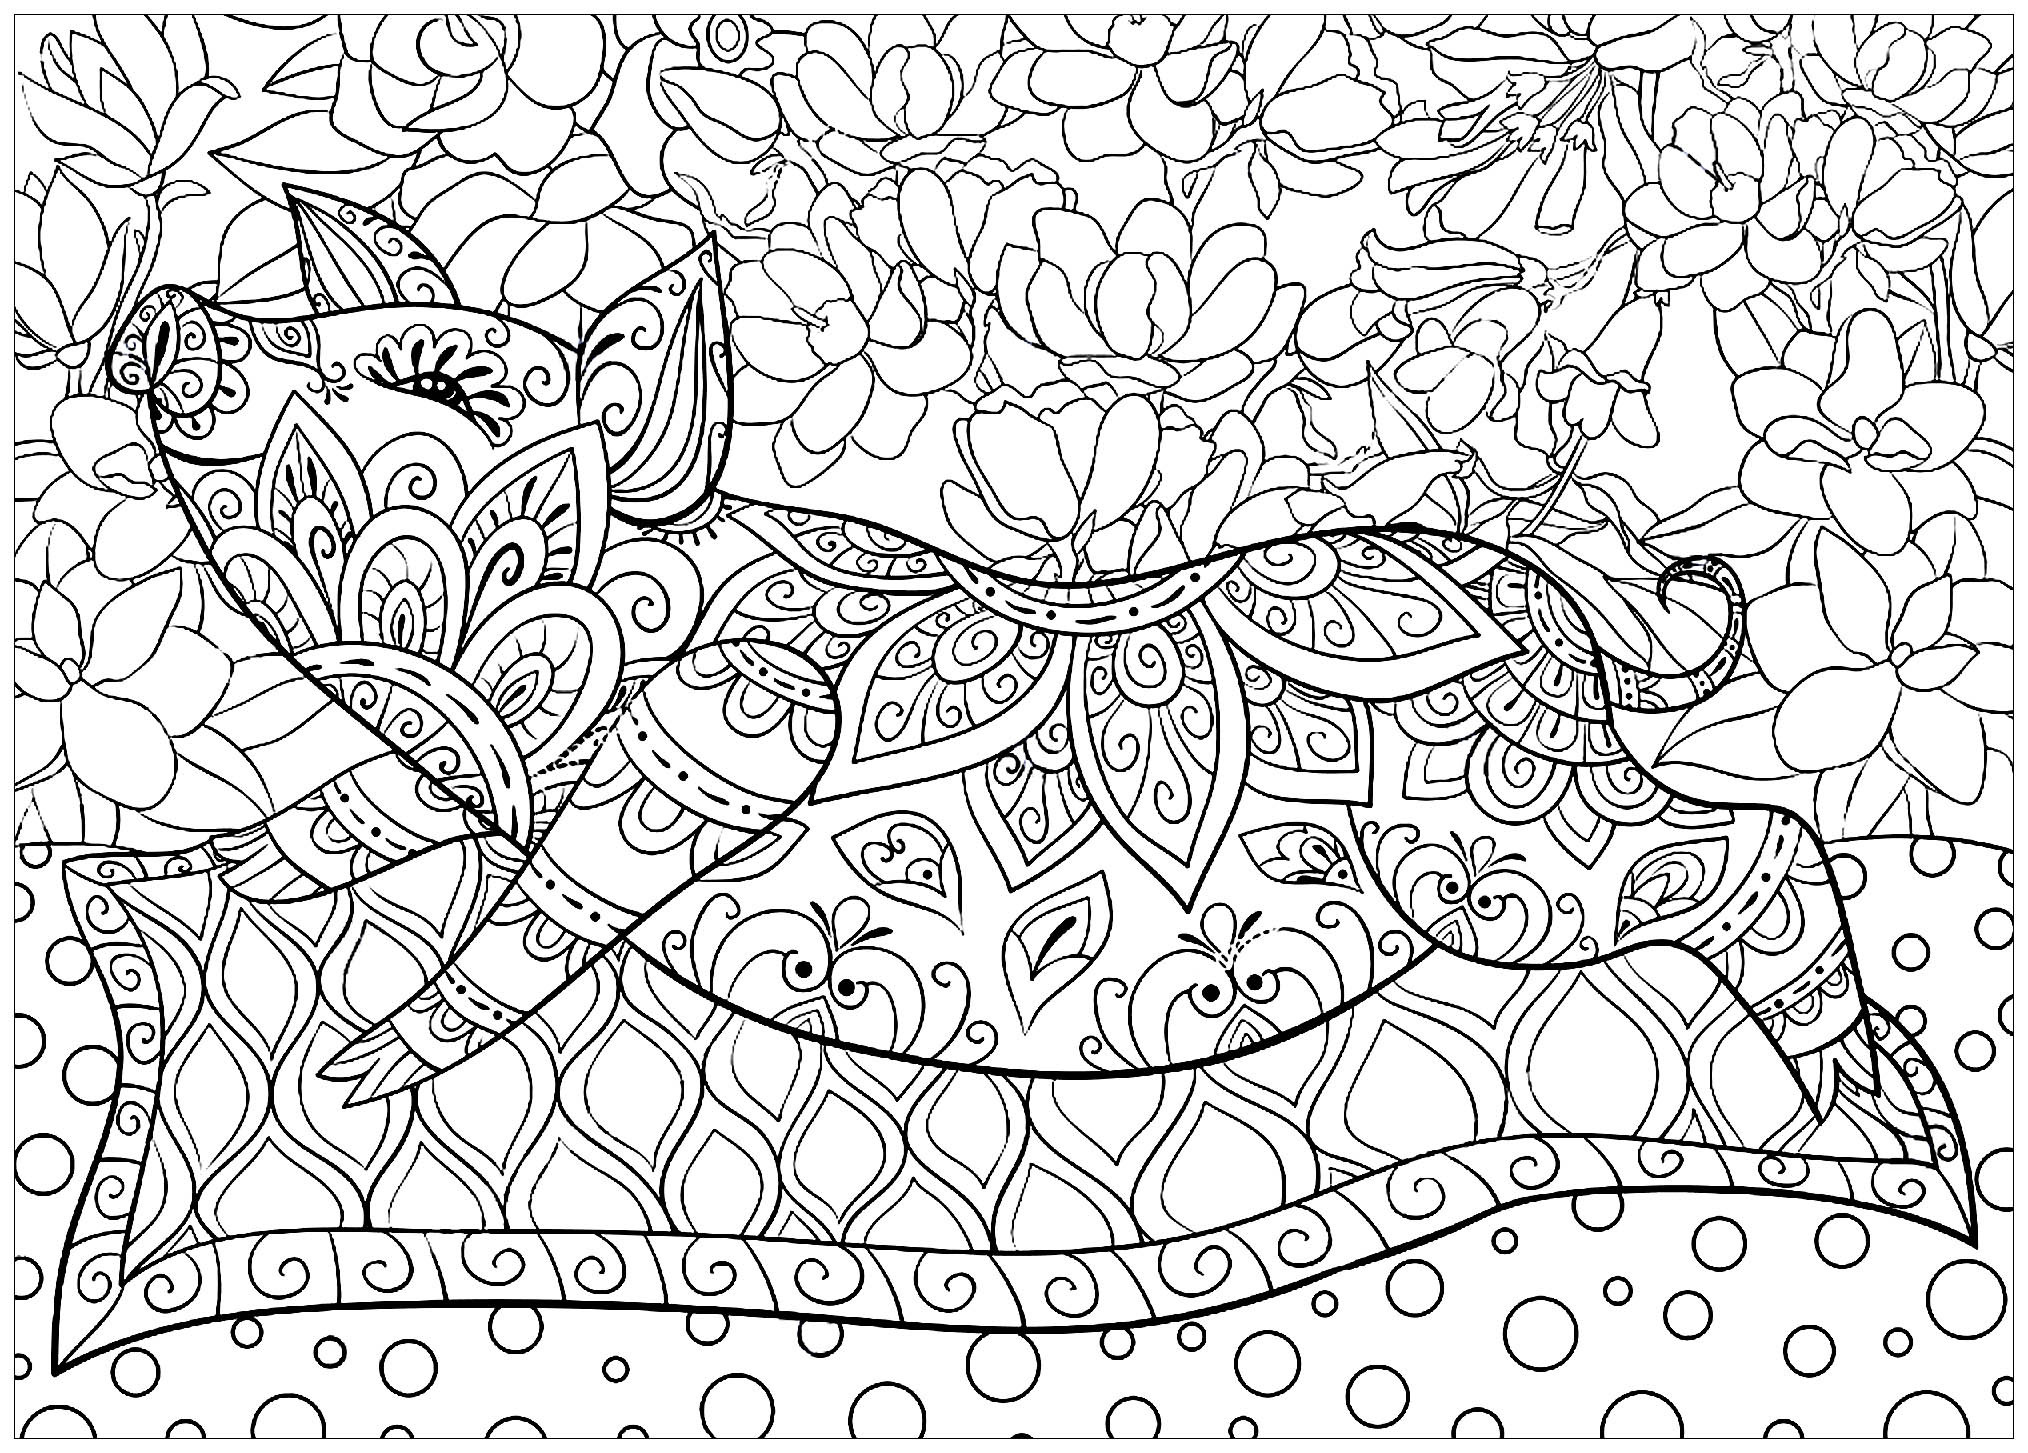 Pig Coloring Pages For Adults
 Pig carpet flowers Pigs Adult Coloring Pages